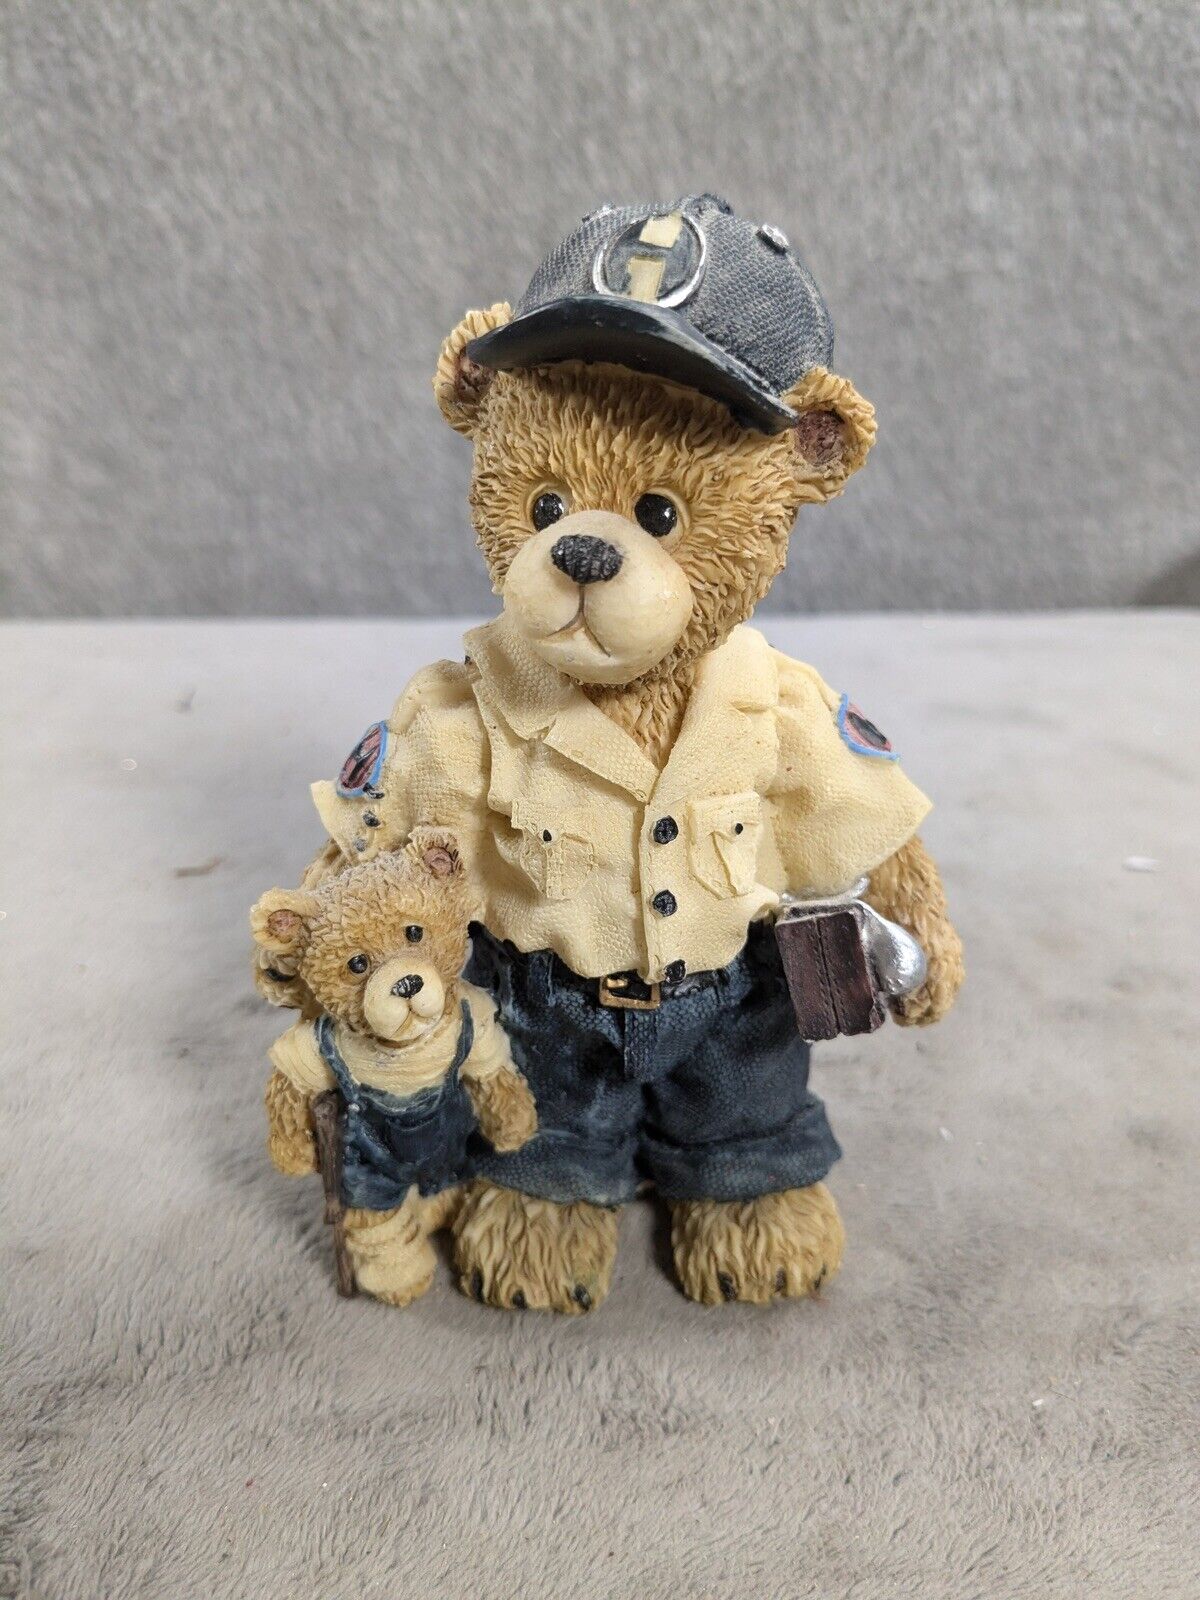 Medic EMT Scout Resin Bear with Little Bear Figurine 5”